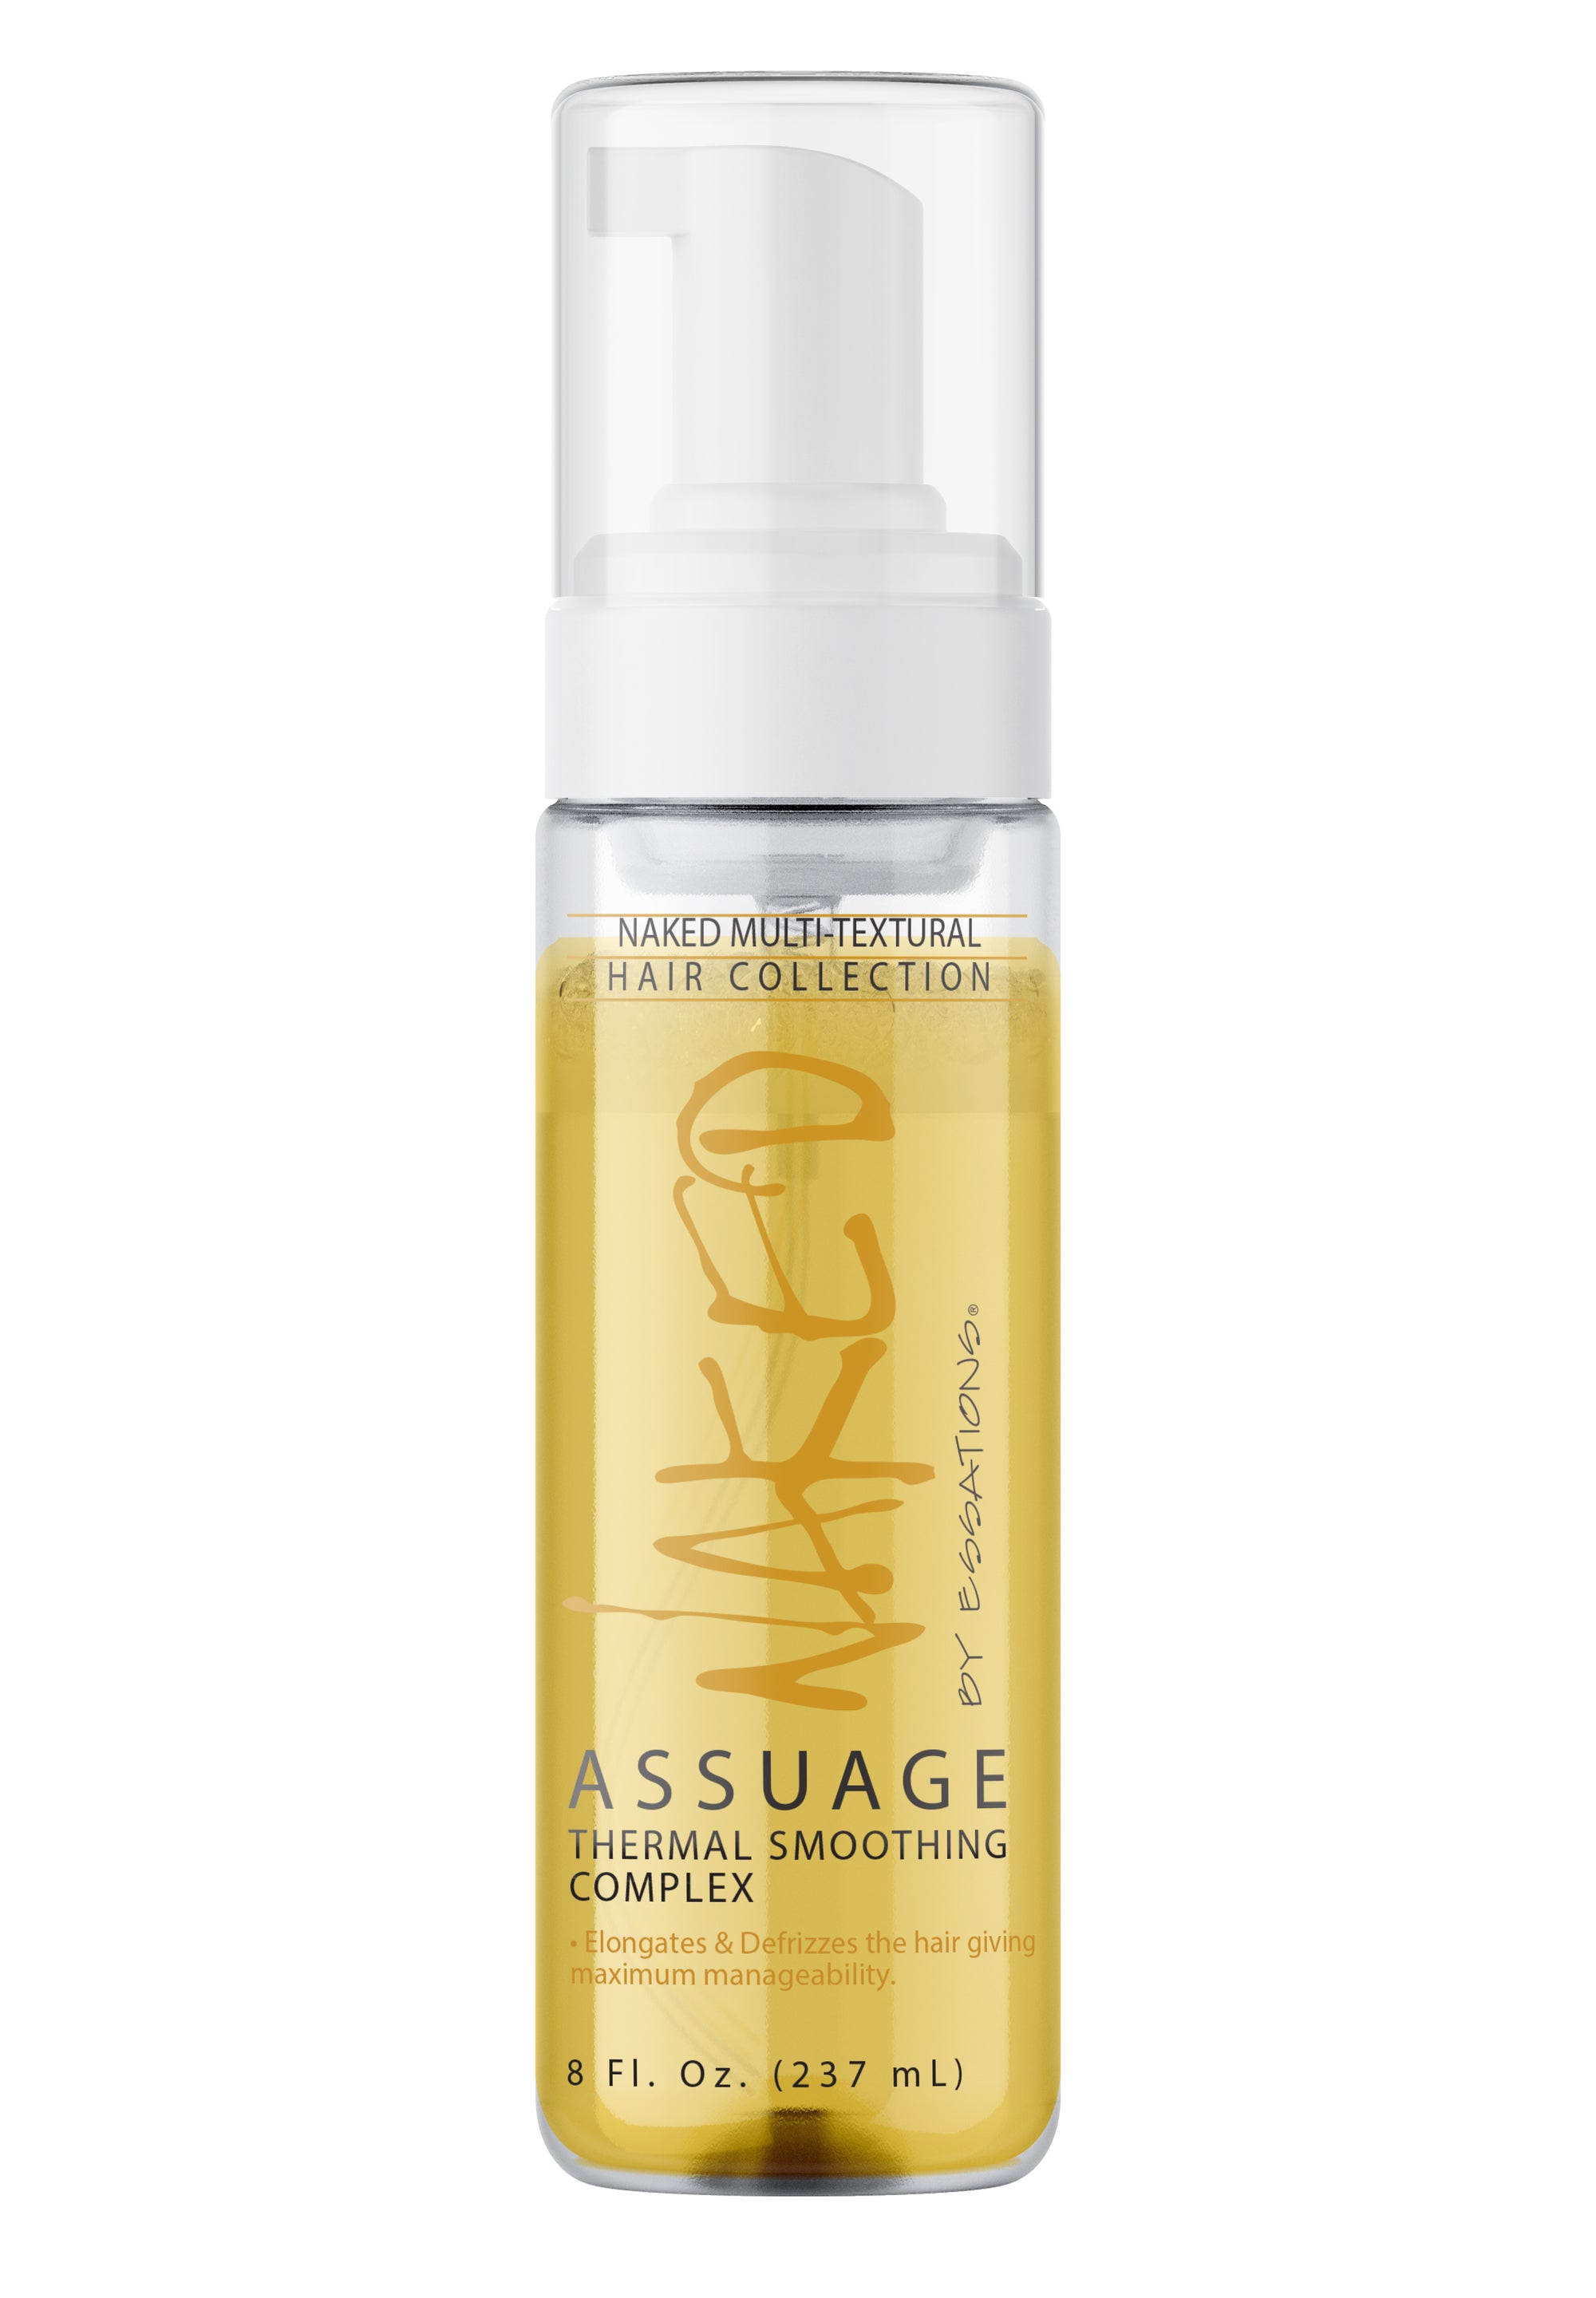 Naked Assuage Thermal Smoothing Complex